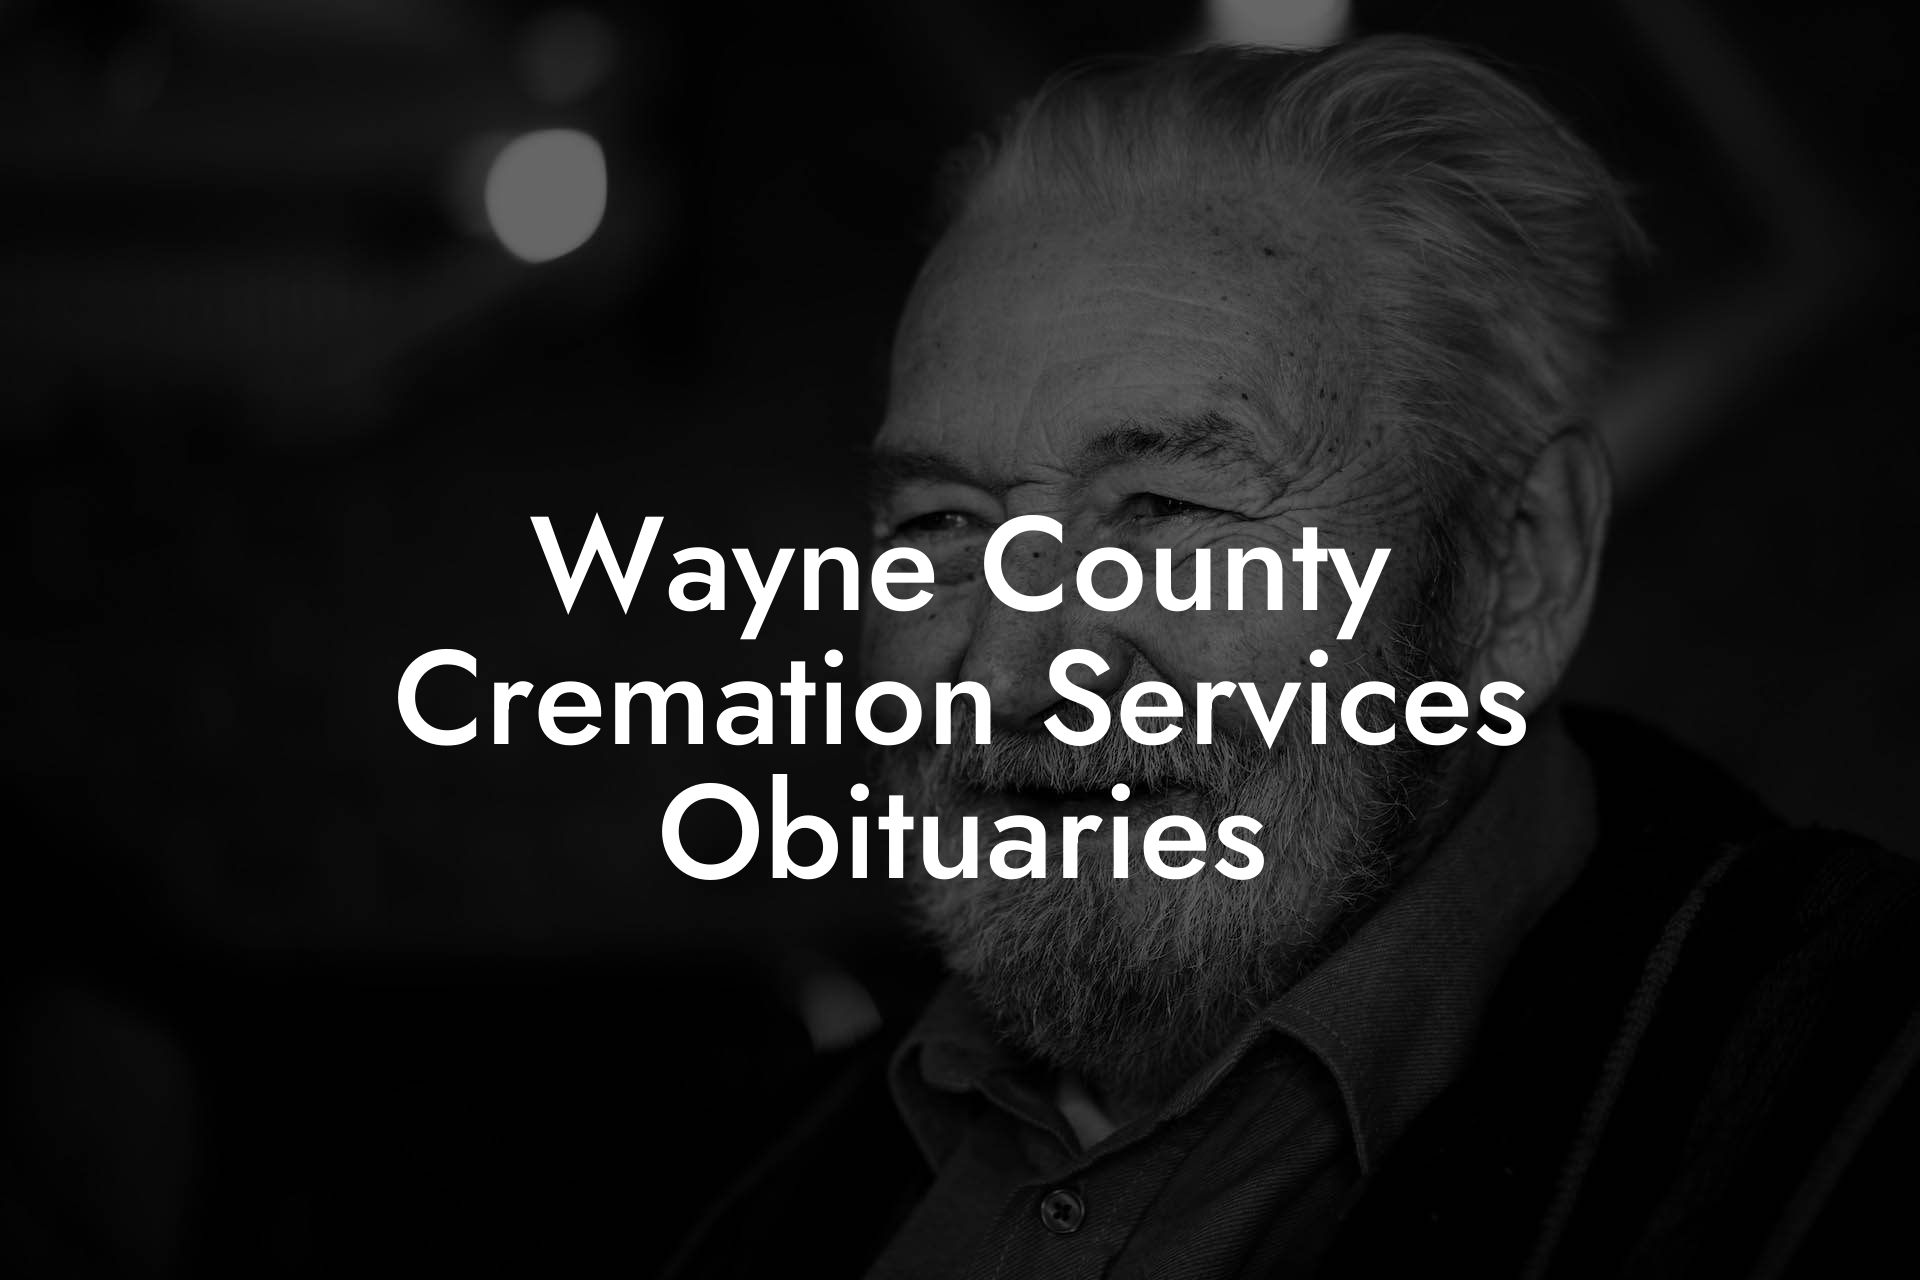 Wayne County Cremation Services Obituaries